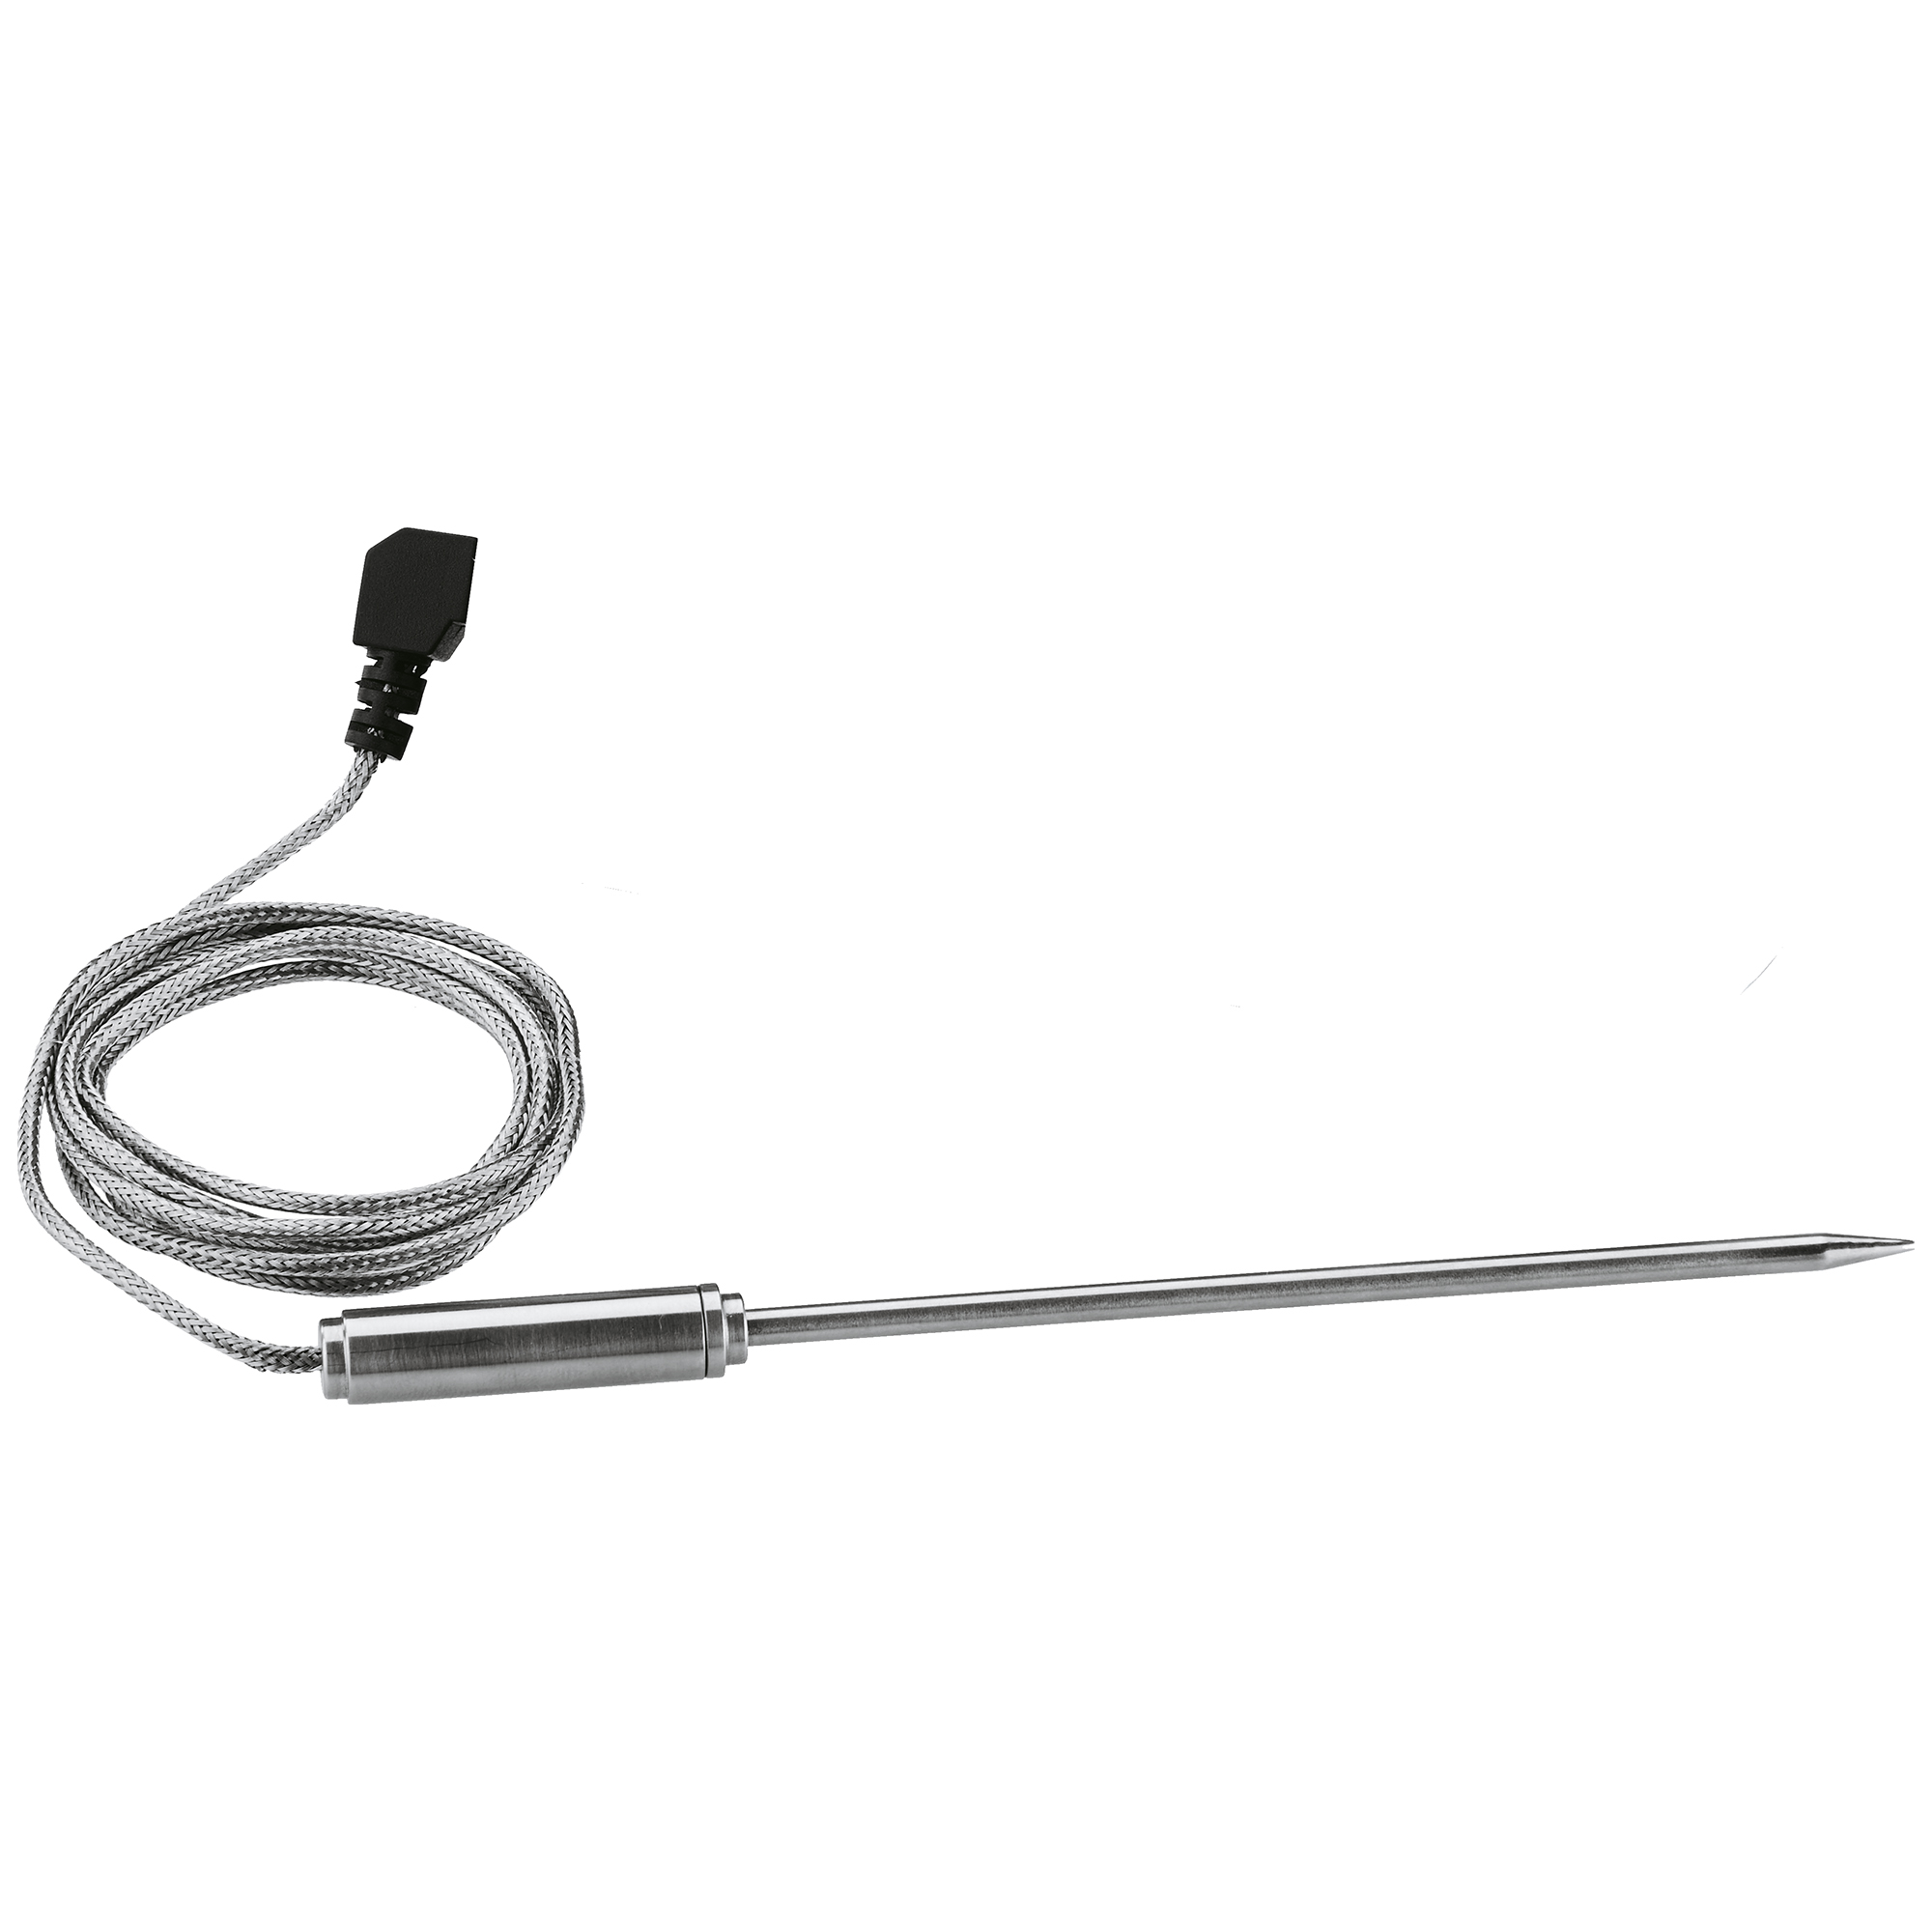 Probe for Barbecue Thermometer digital (Item no. 25086)